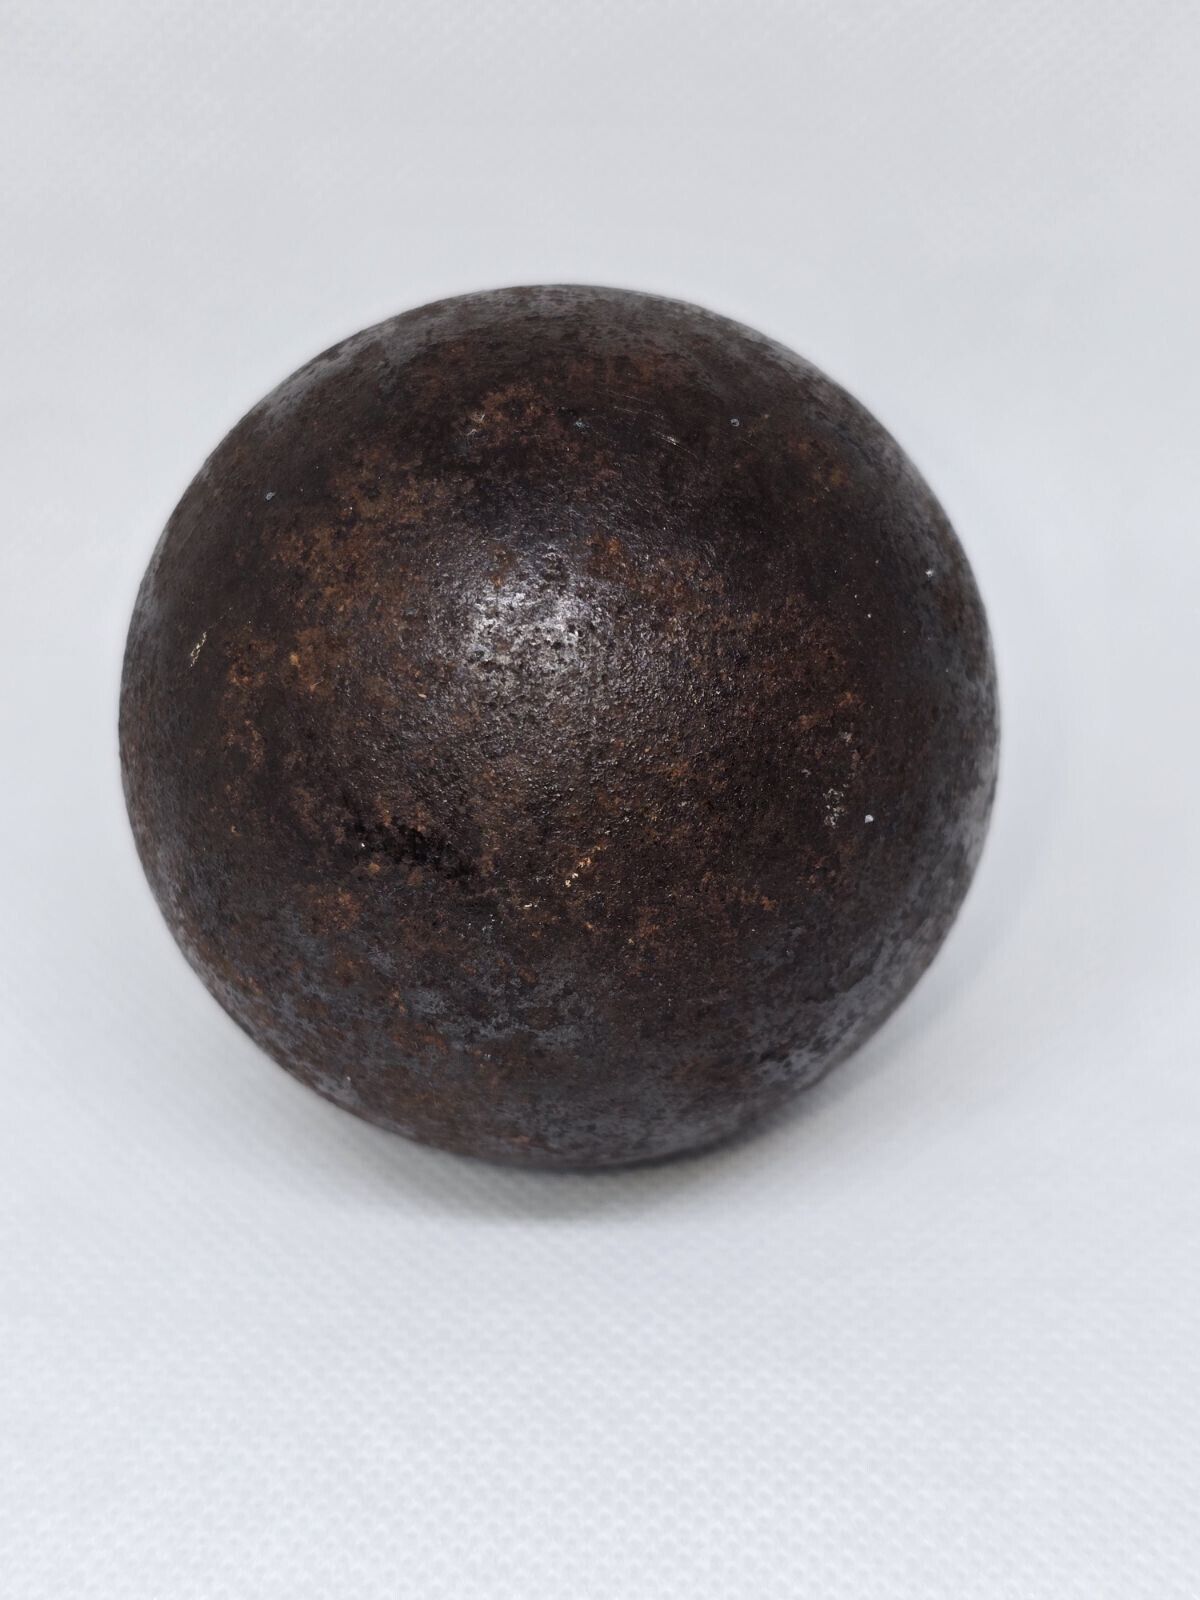 Antique 2-1/2 inch Cannon ball